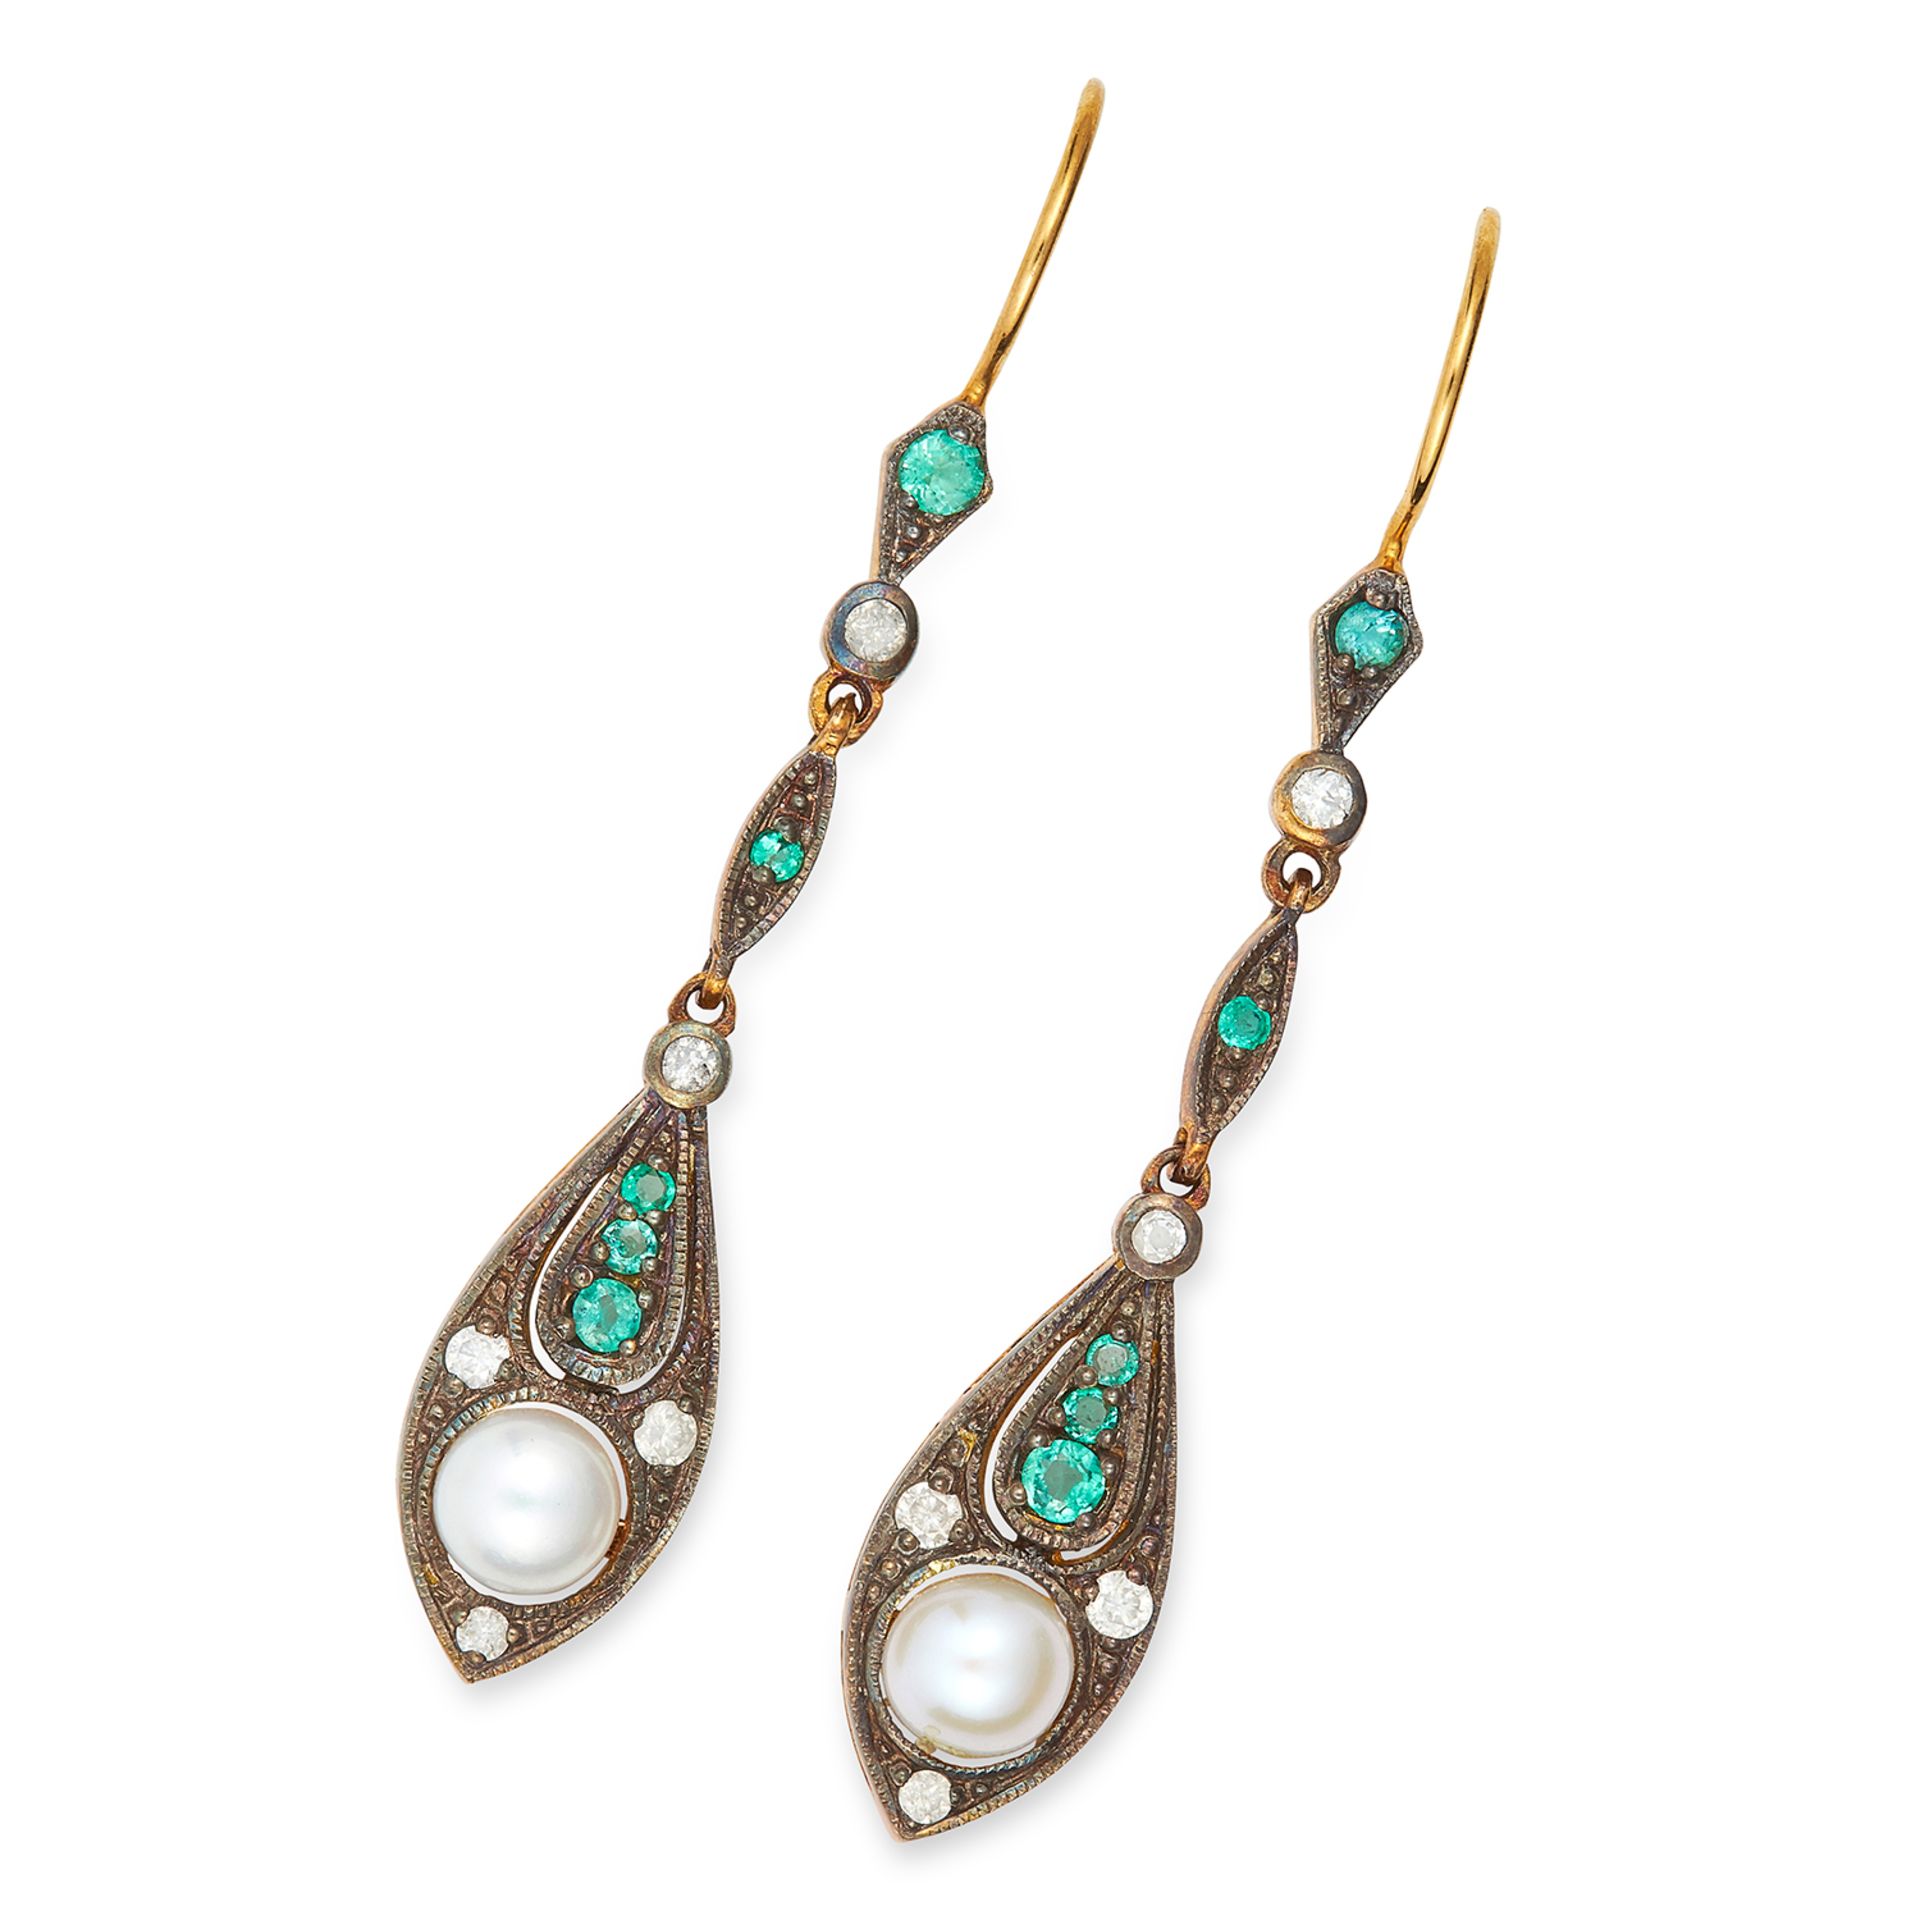 EMERALD, PEARL AND DIAMOND DROP EARRINGS each set with round cut emeralds and diamonds and a